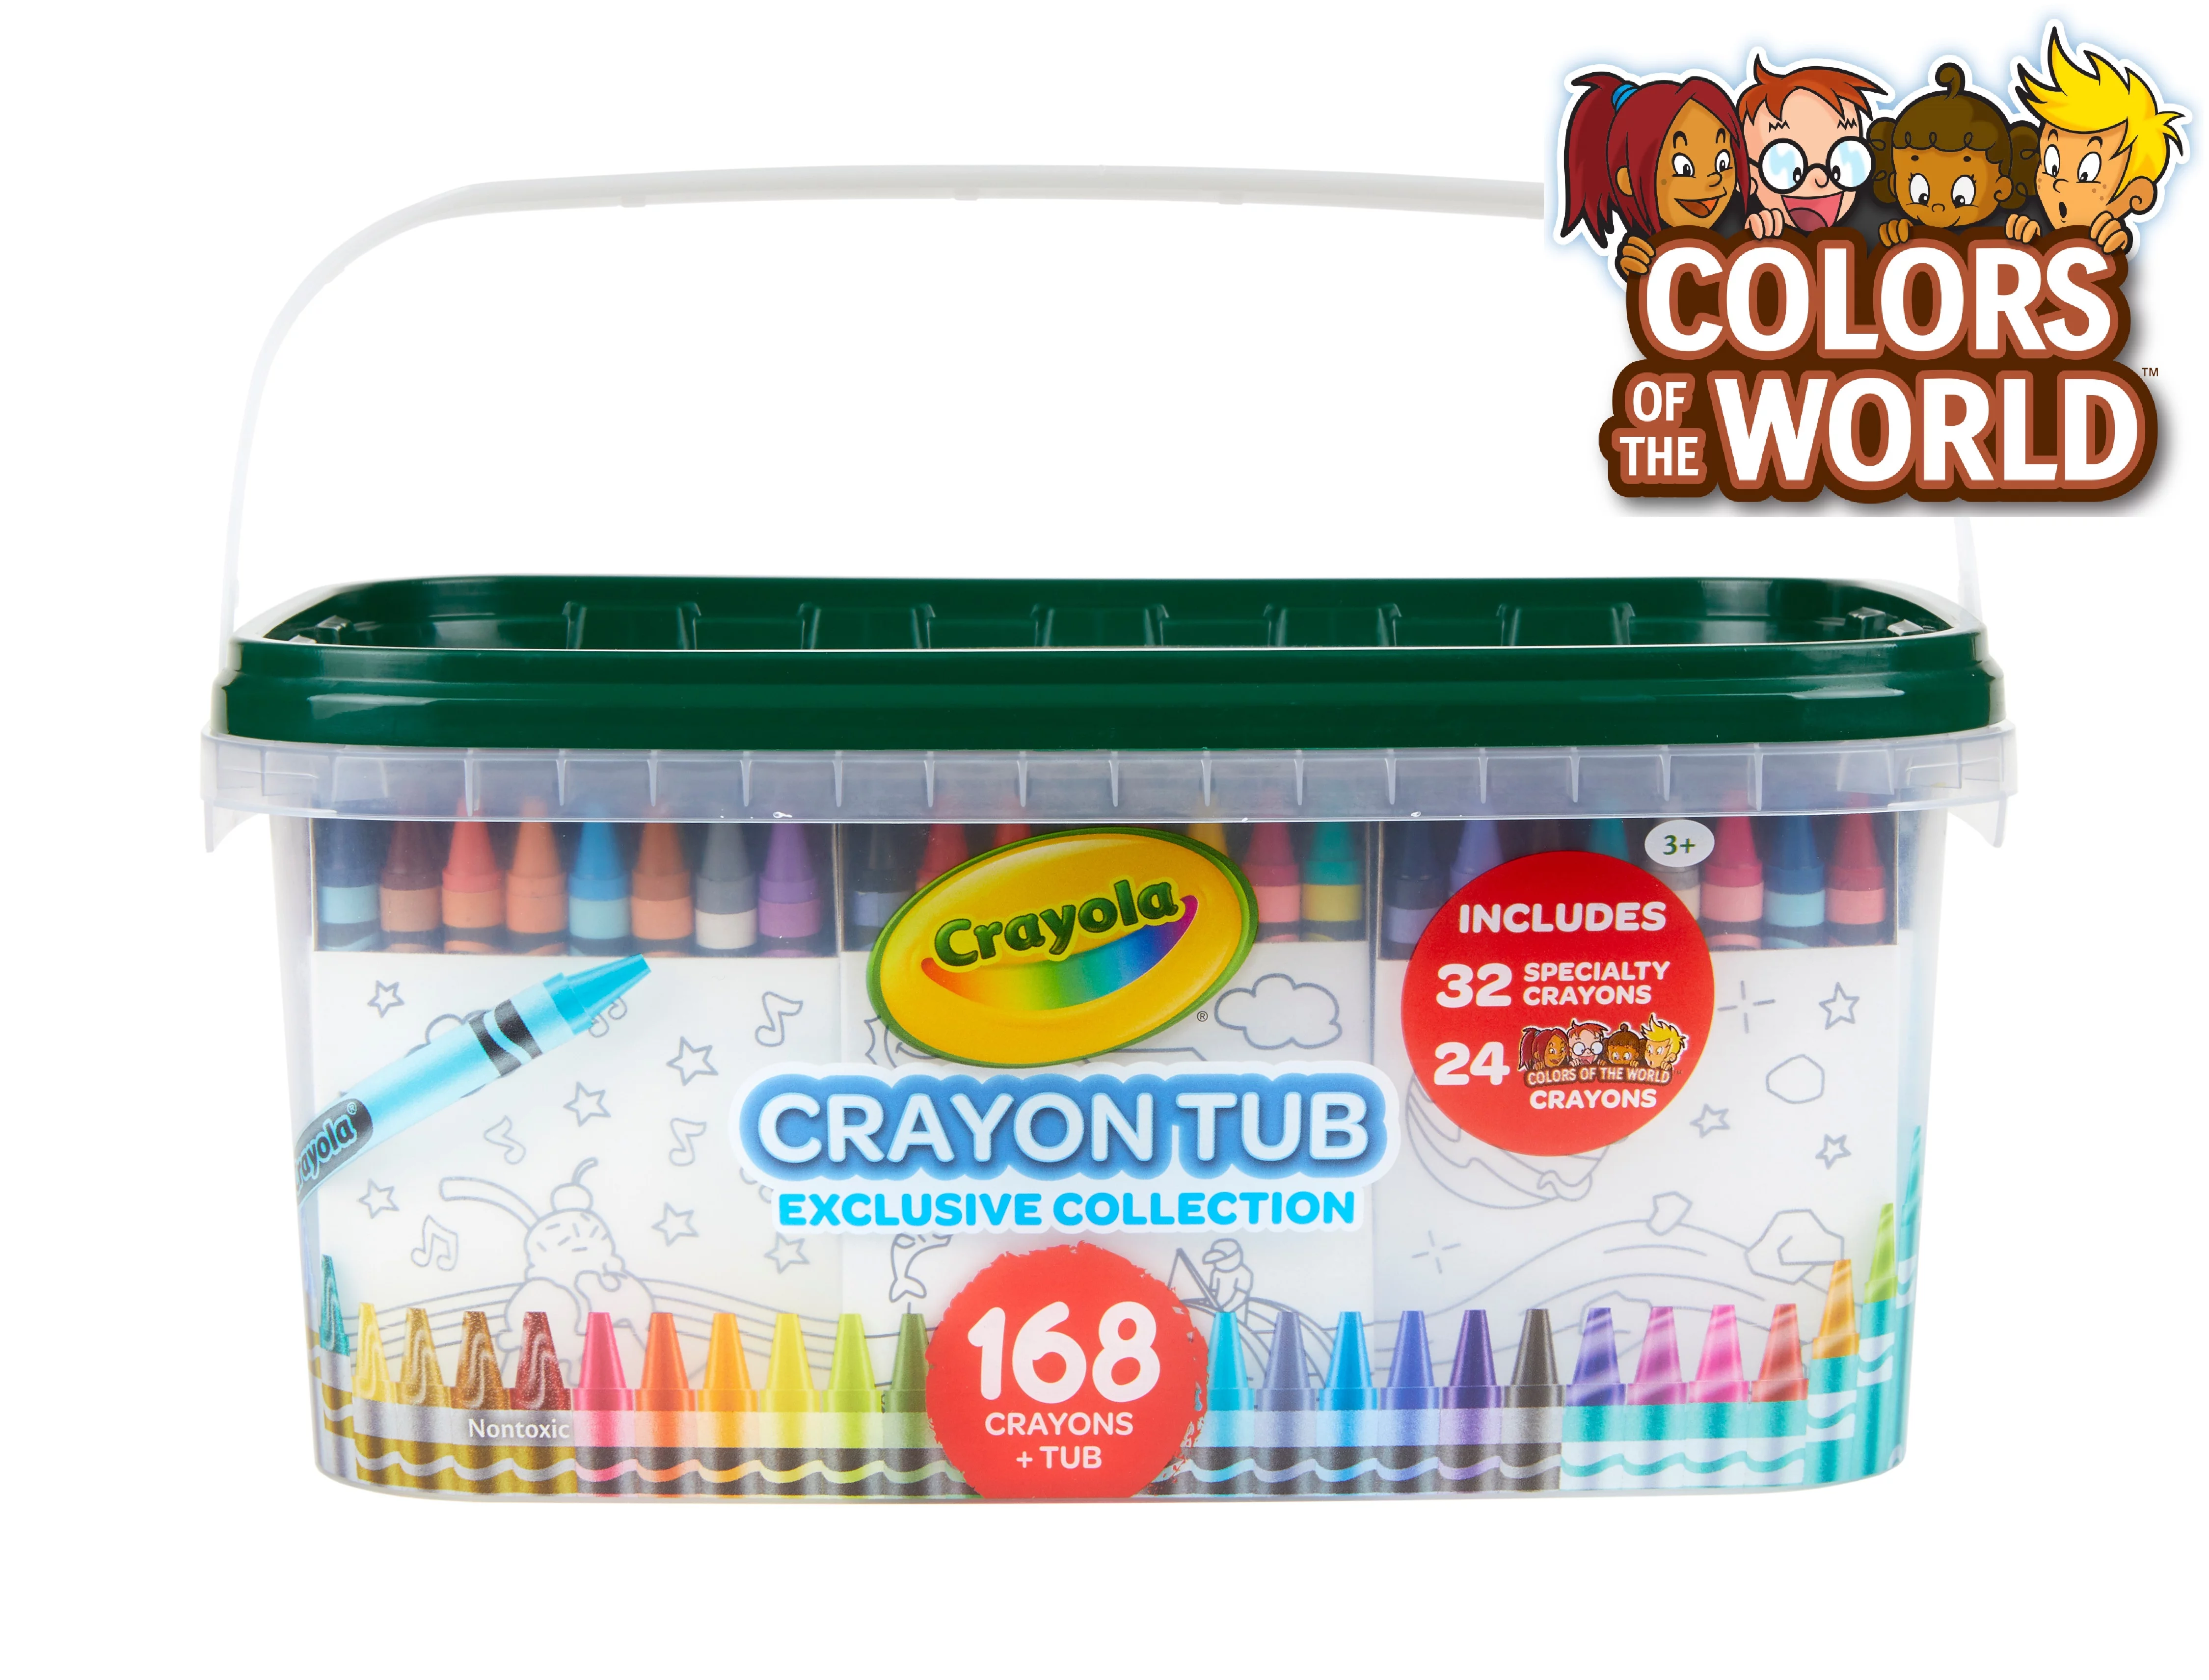 Crayola Crayon & Storage Tub, School Supplies, 168 Ct, with Colors of the World Crayons, Holiday Gift for Kids